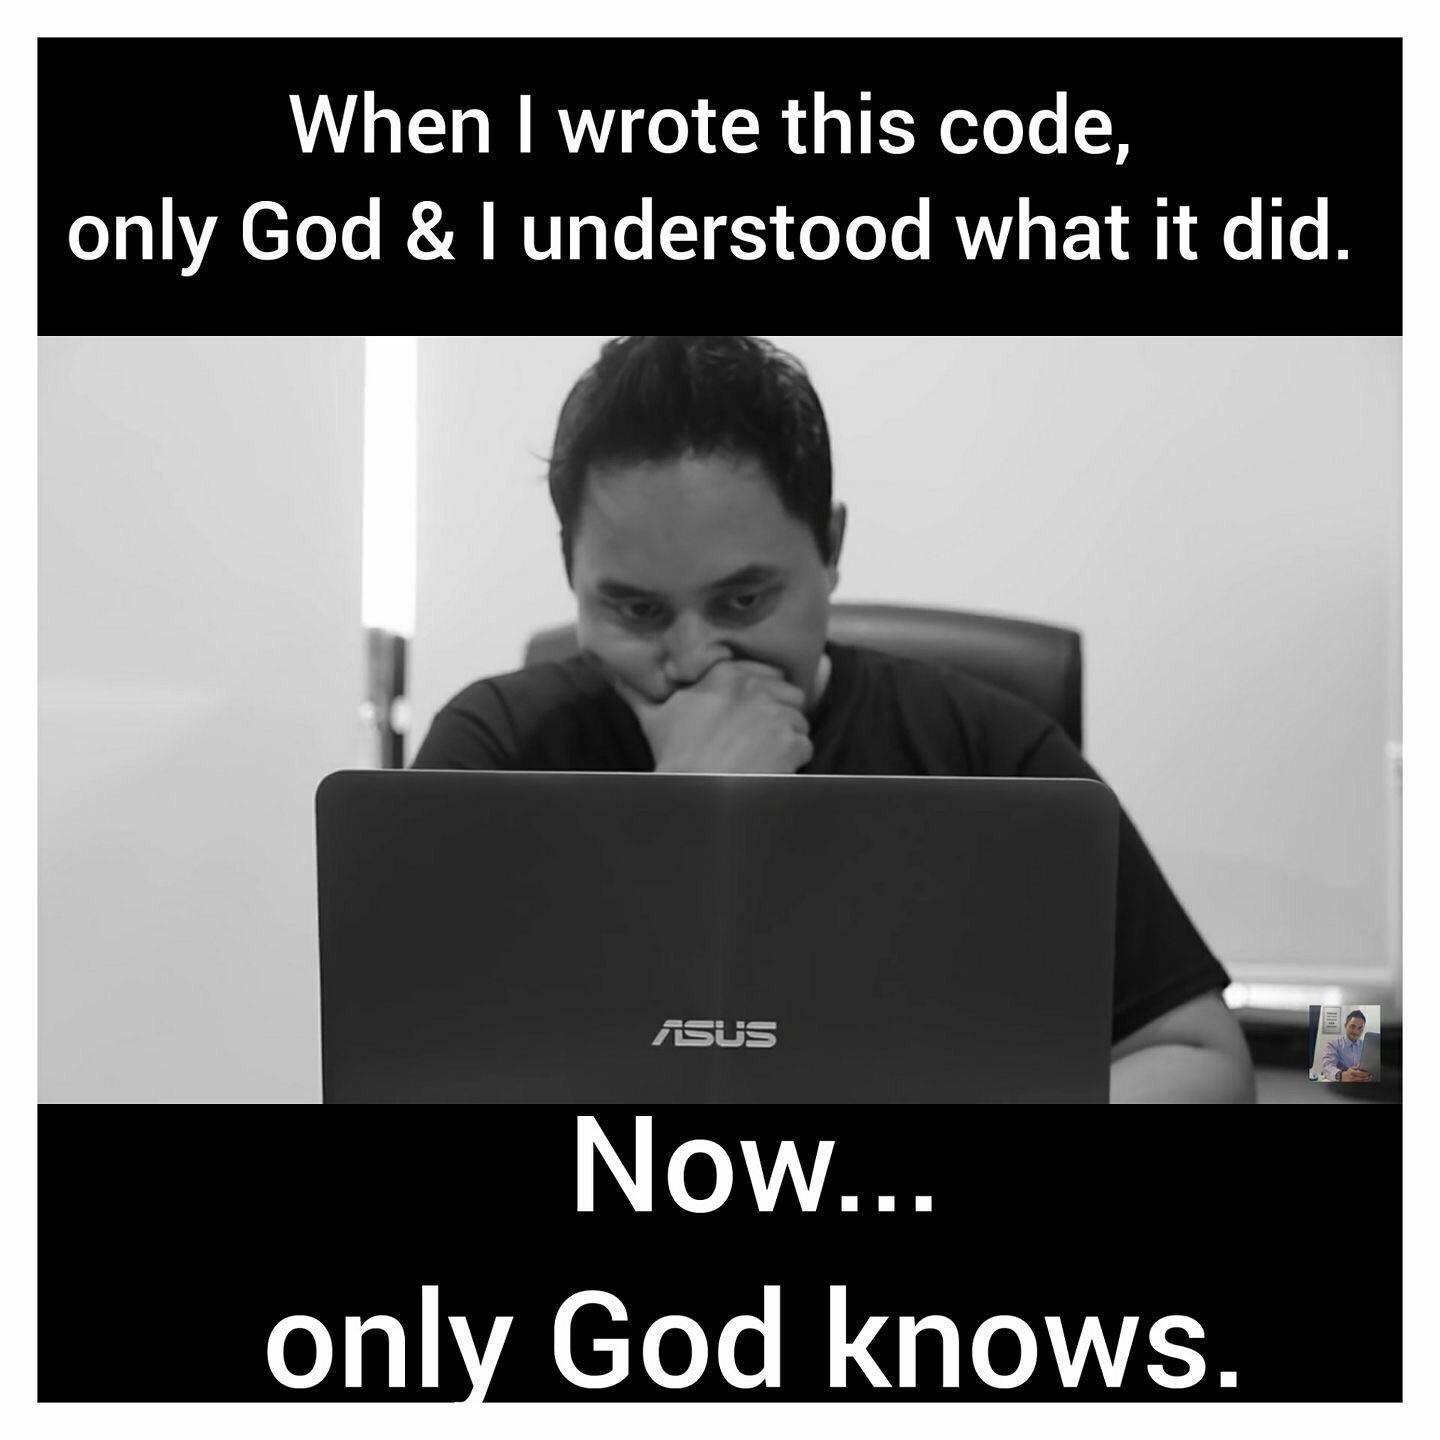 When I wrote this code, only God & I understood what it did